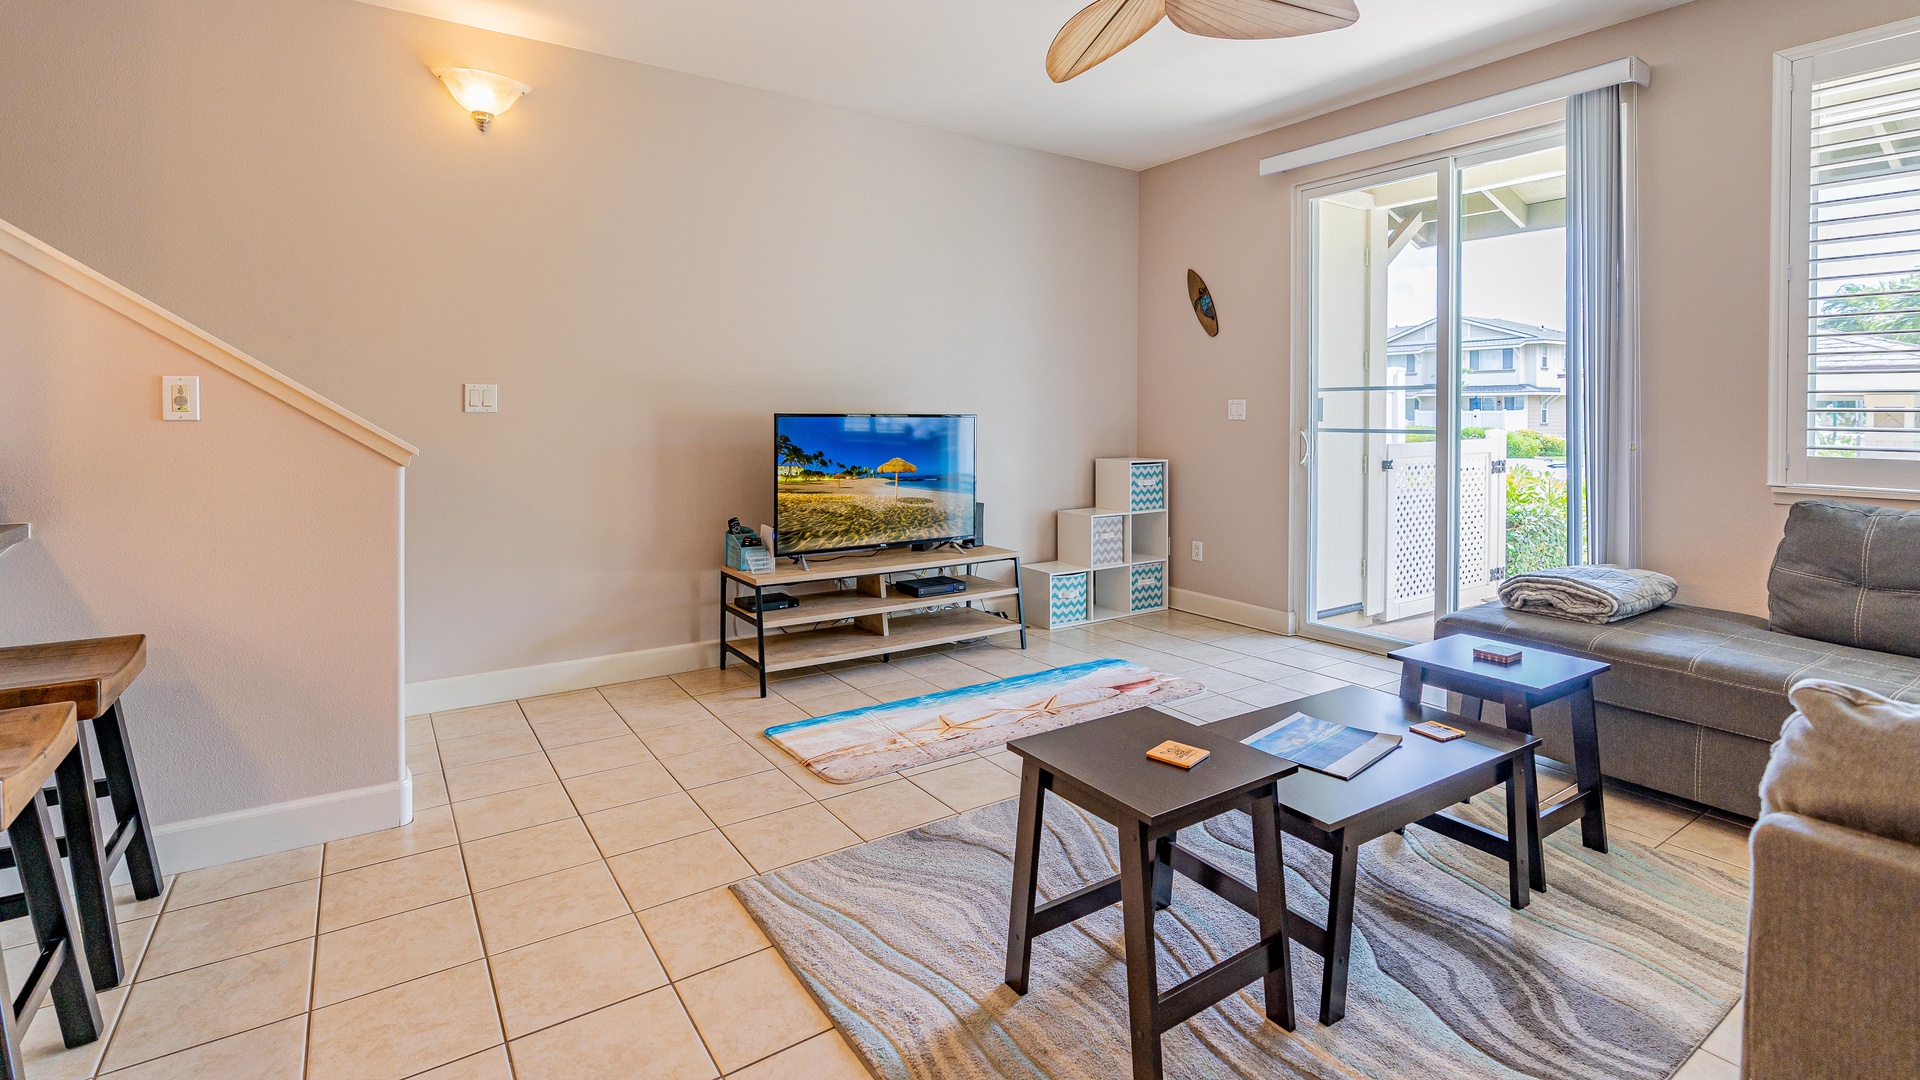 Kapolei Vacation Rentals, Hillside Villas 1508-2 - Relax with a book or movie night on the television and enjoy the views.